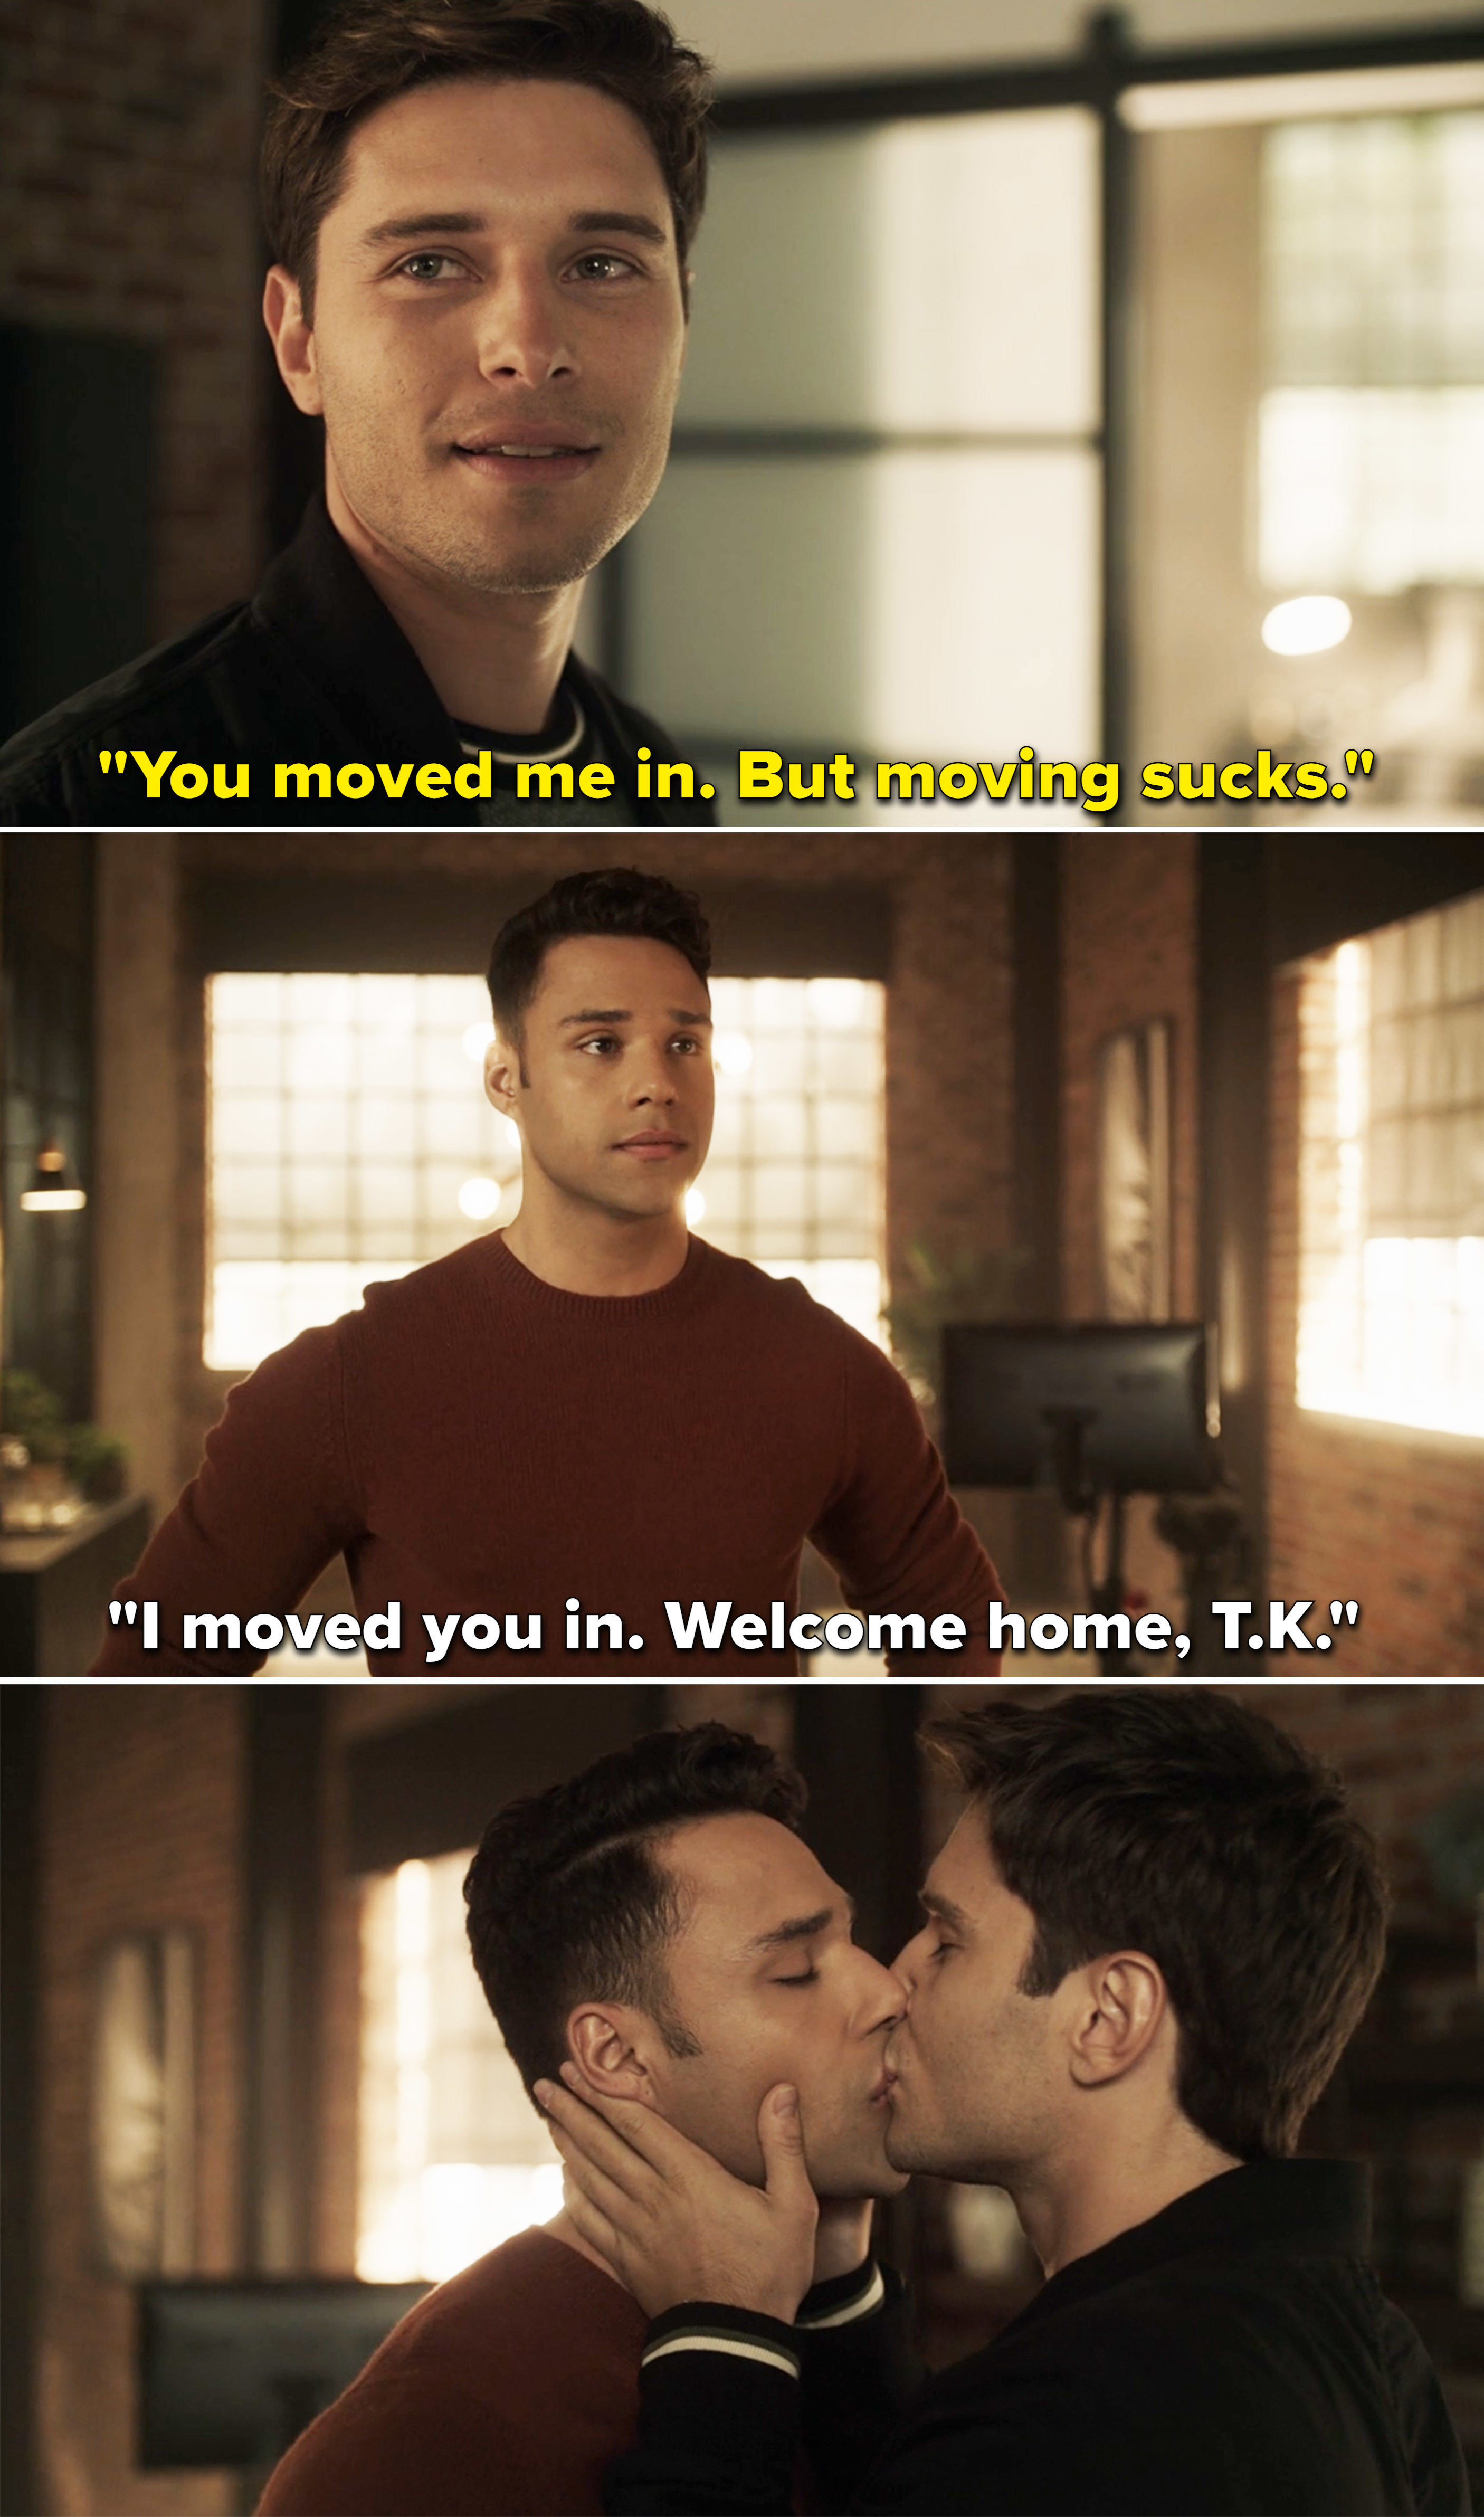 Carlos says welcome home to TK, and then they kiss